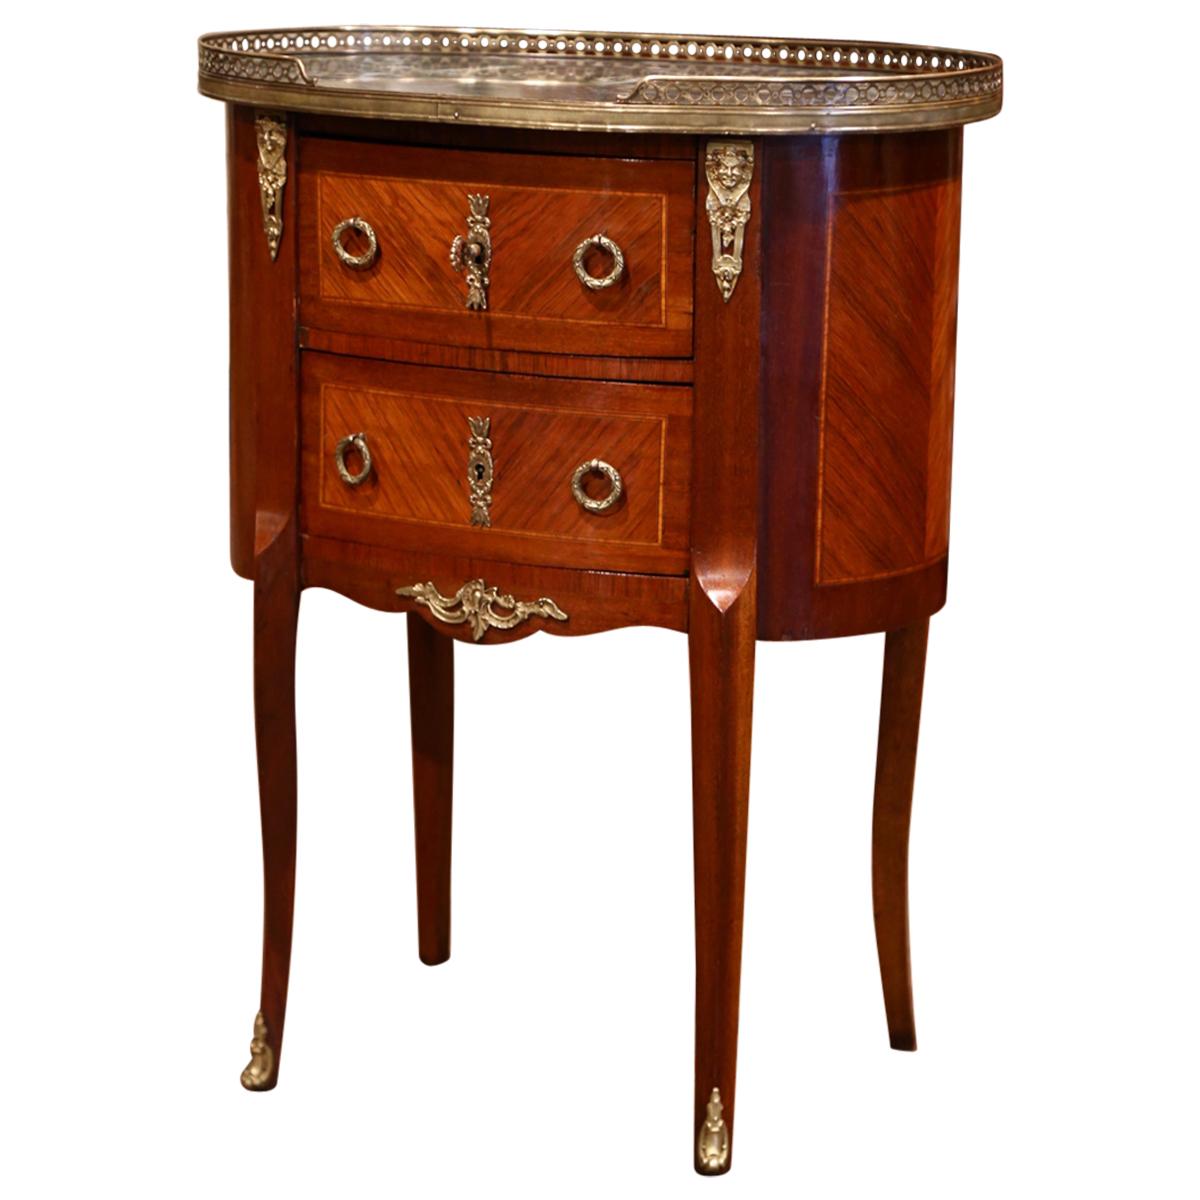 This elegant oval shape fruitwood antique commode was crafted in Paris, circa 1950. The chest sits on cabriole legs decorated with bronze sabot feet, over a scalloped apron embellished with a brass mount. The front has two drawers with marquetry